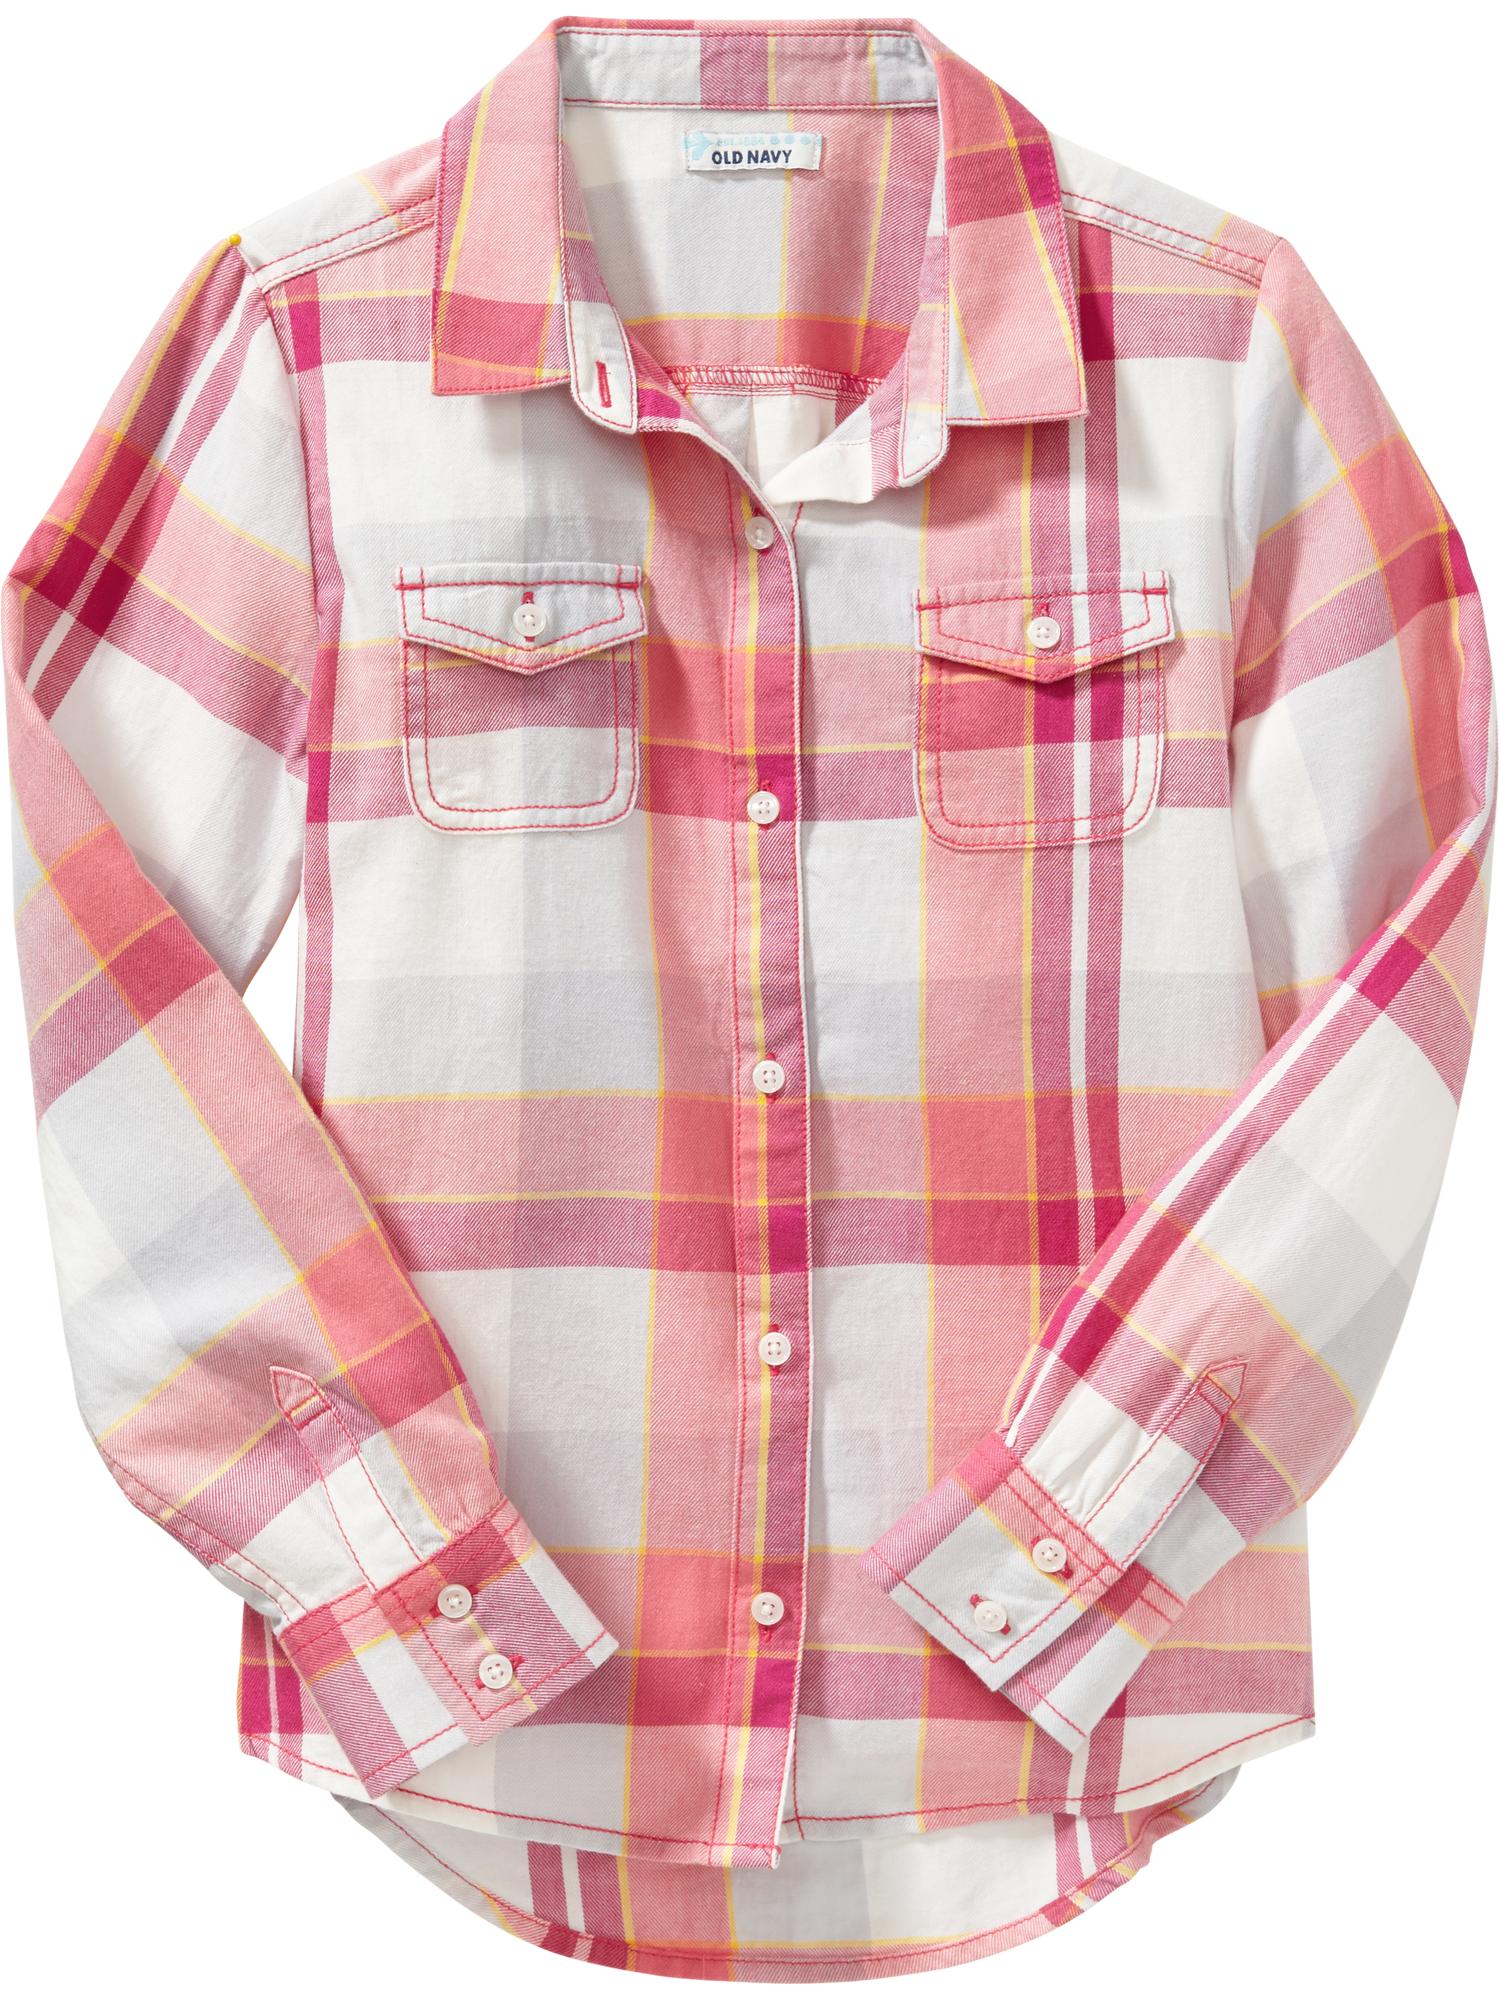 Girls Plaid Flannel Shirts | Old Navy